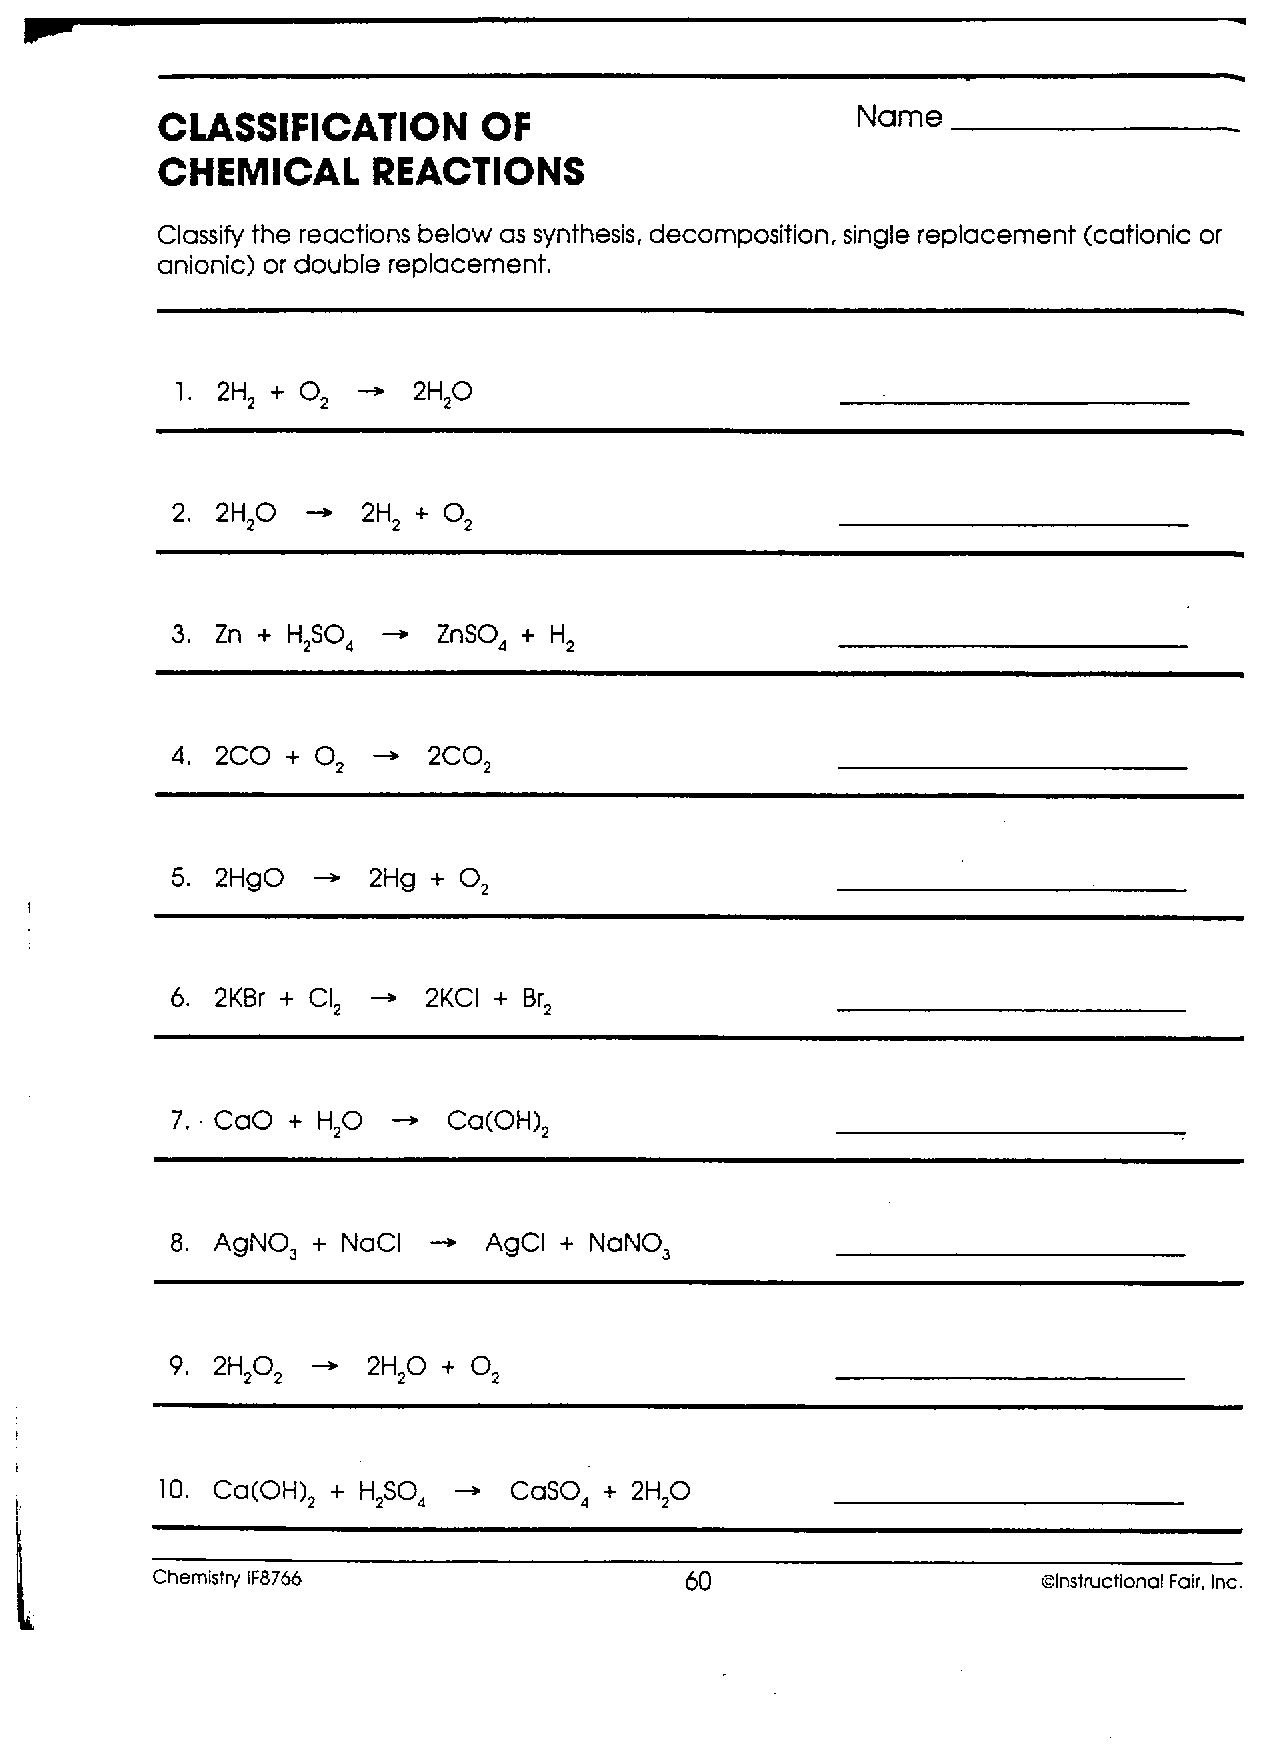 chemistry-worksheets-for-high-school-db-excel